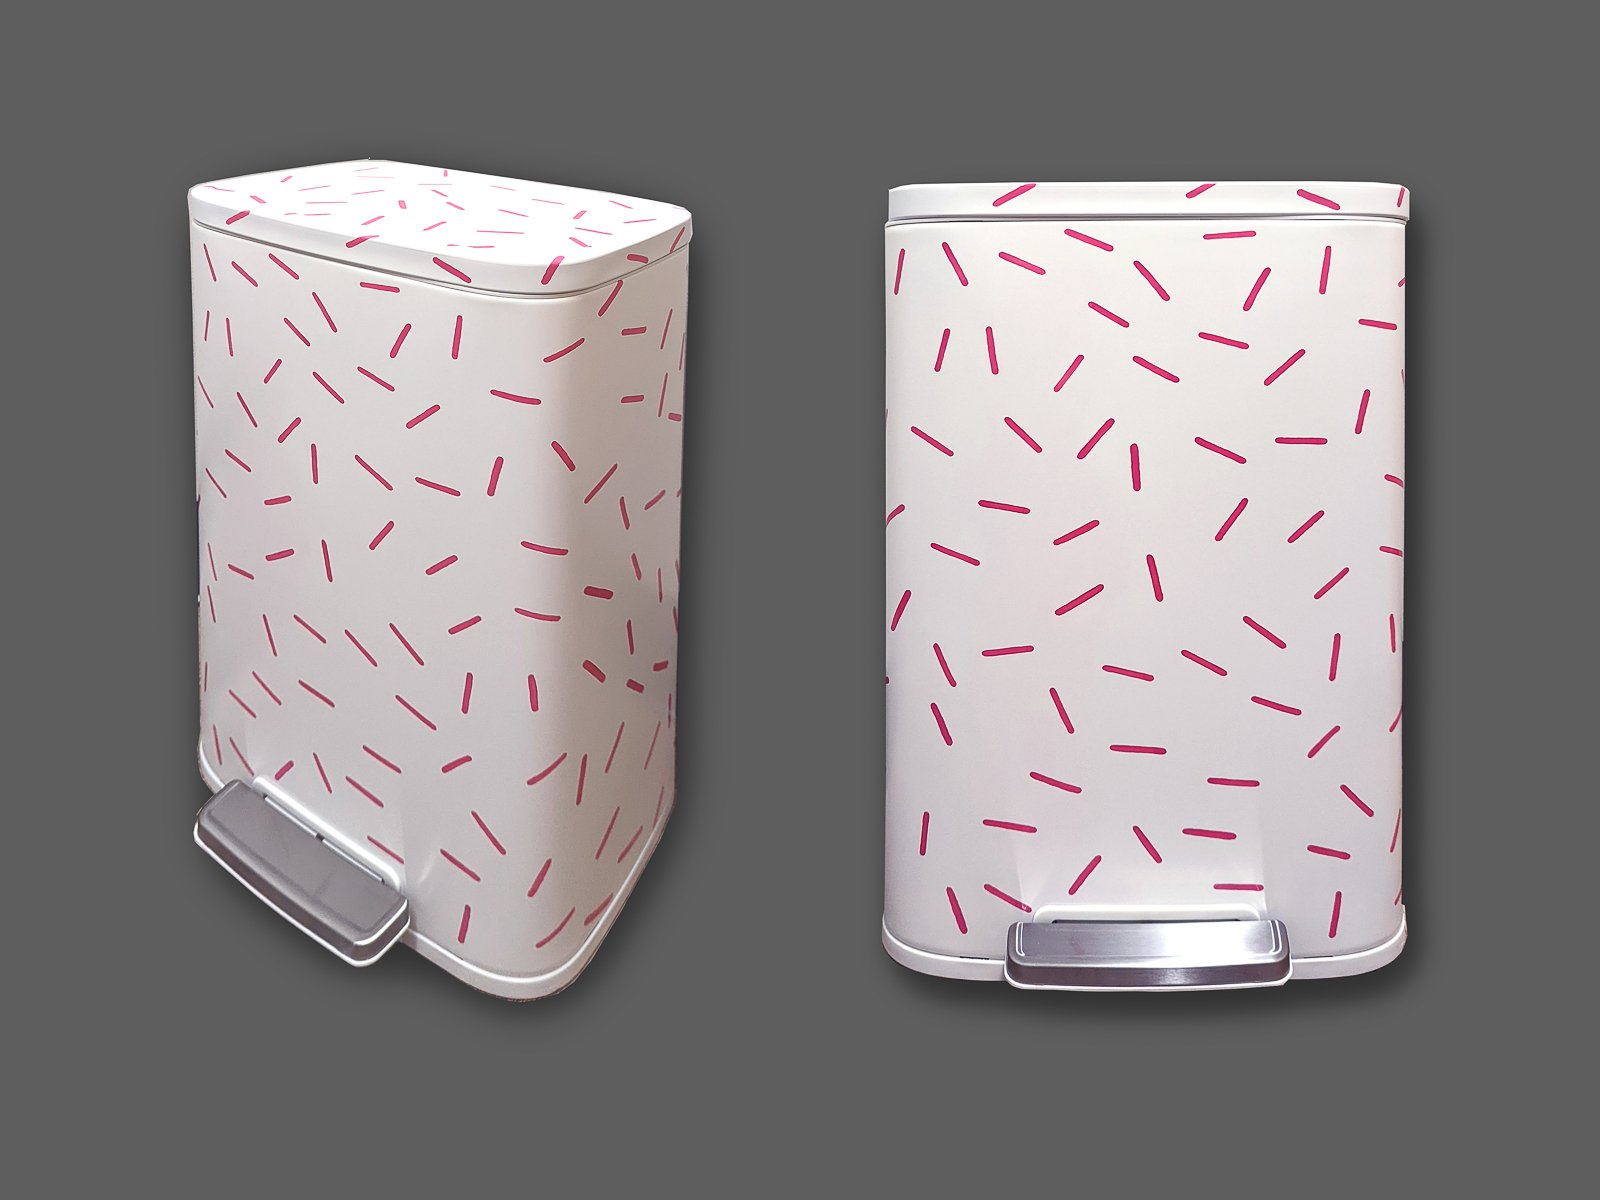 Hand painted trash cans to add visual interest.